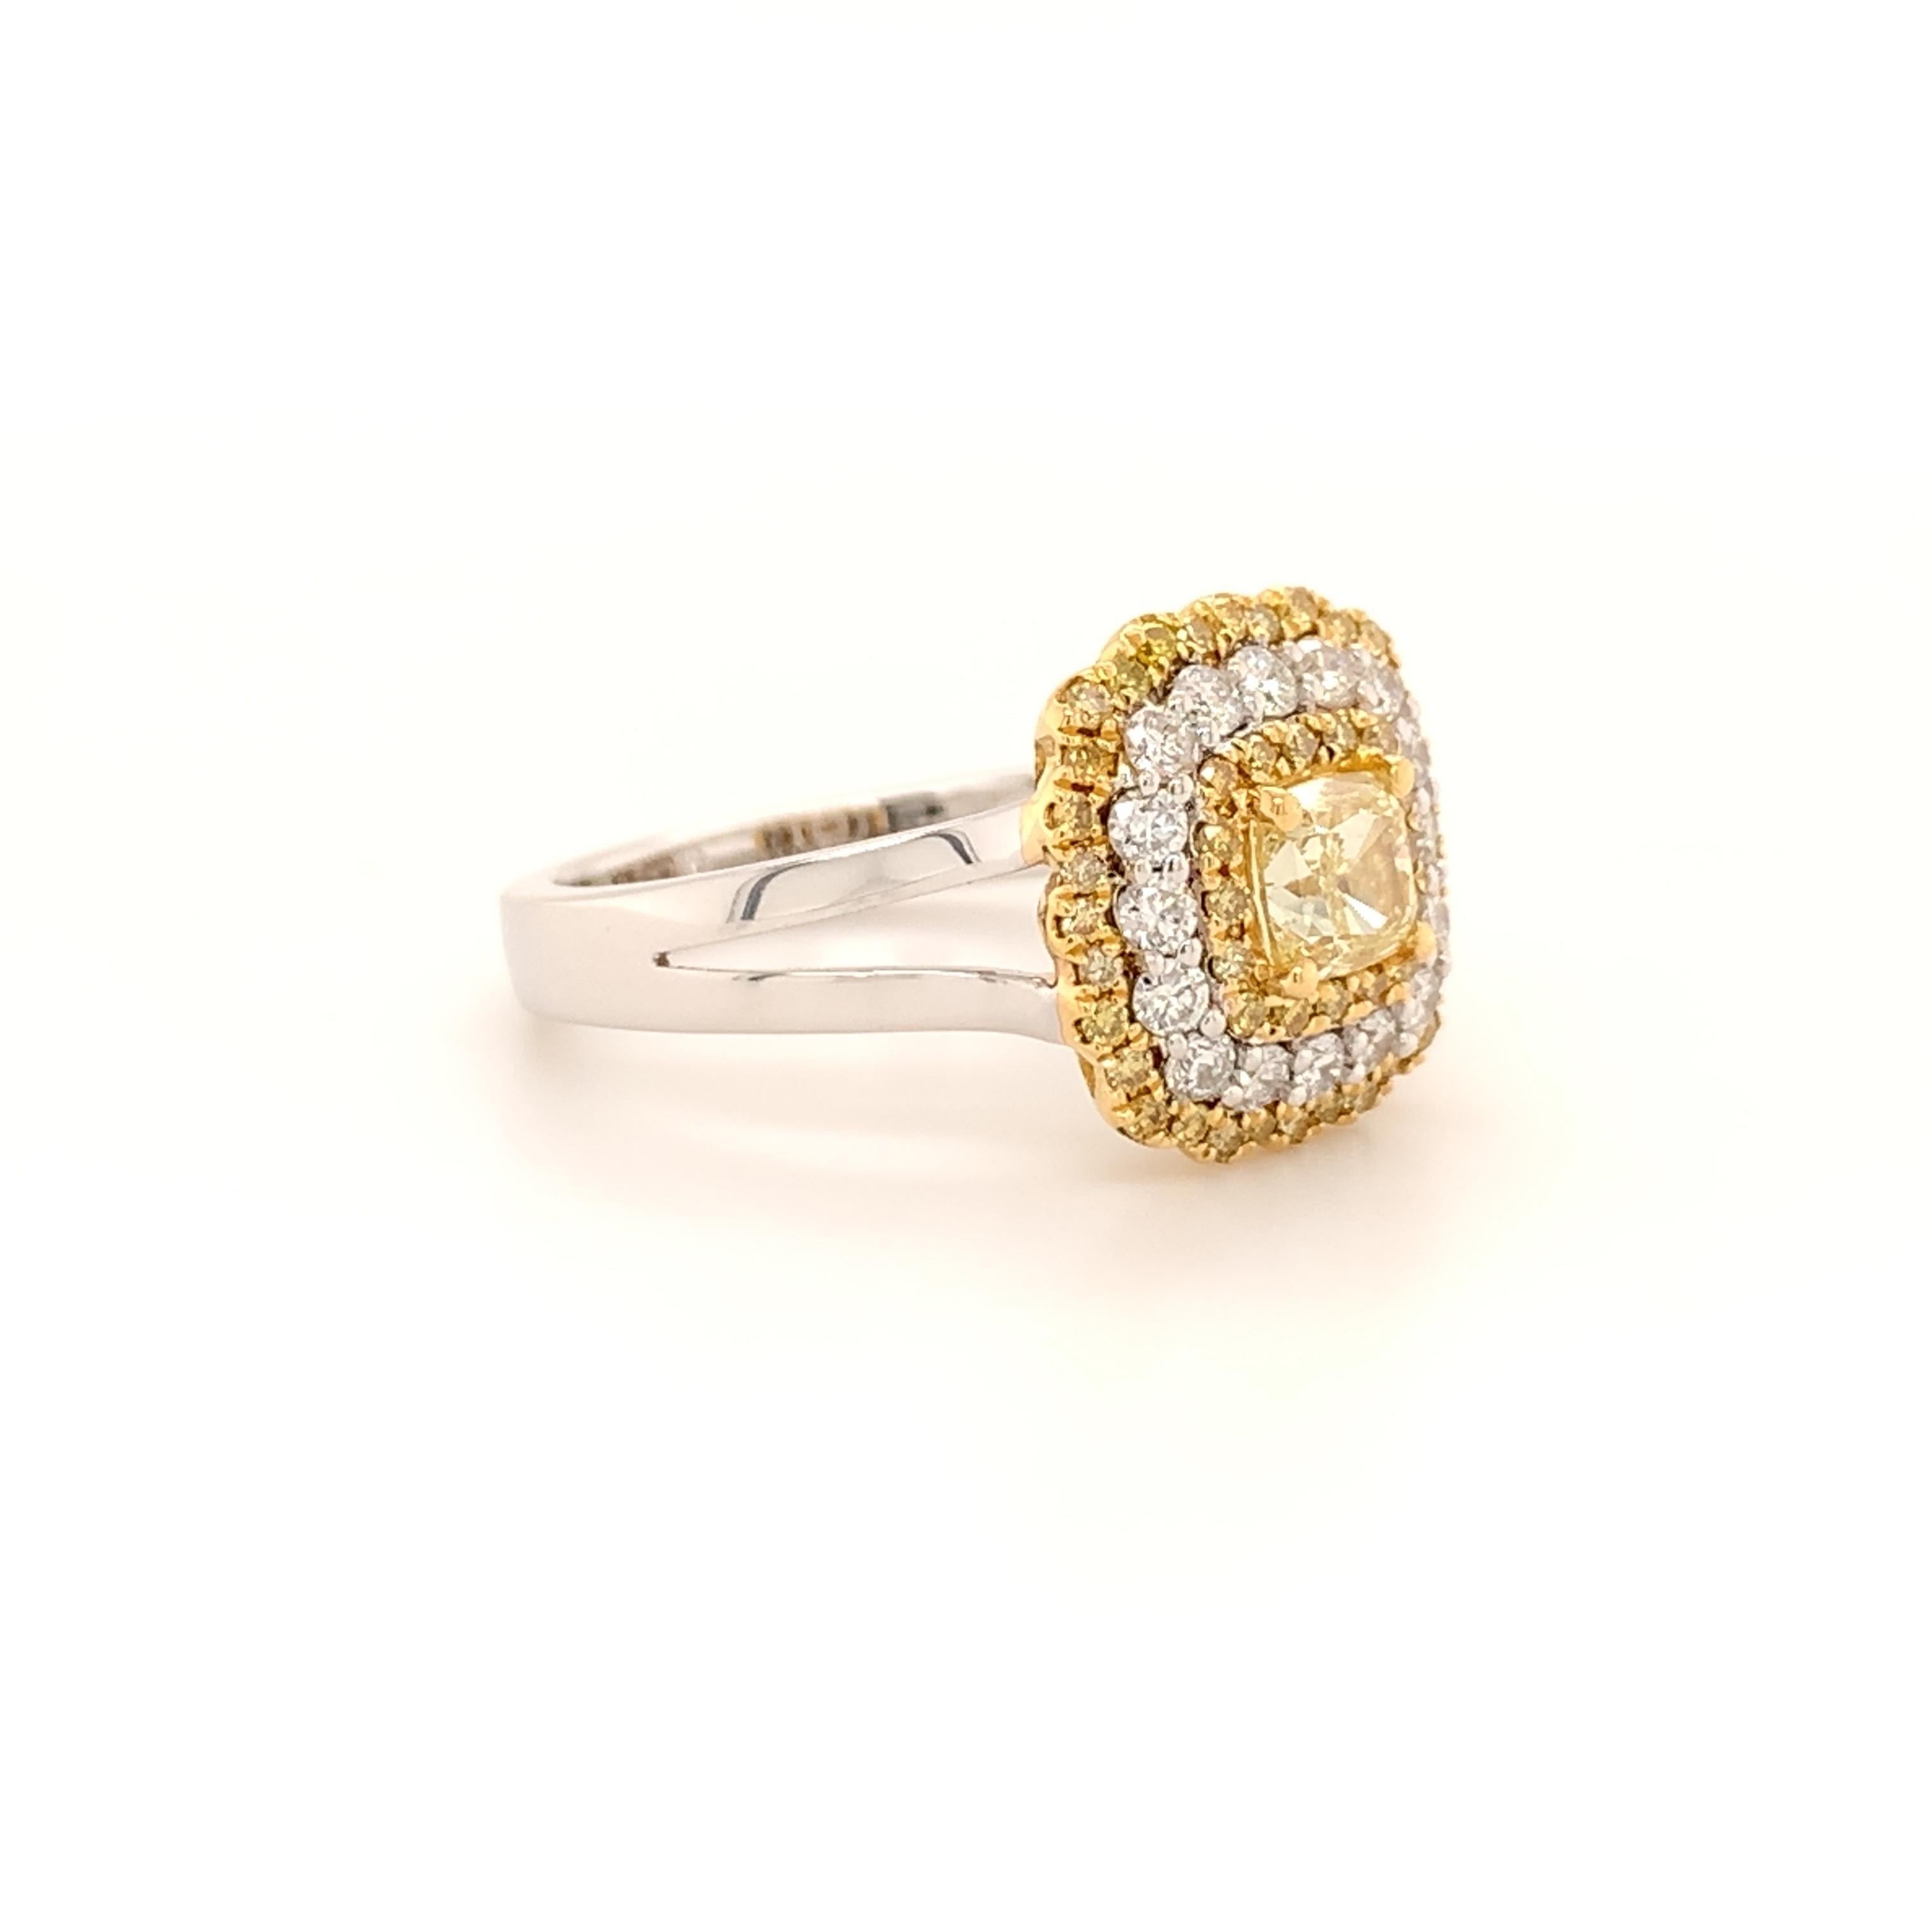 Breathtaking design diamond ring. High brilliance, cushion faceted, 0.61 carat natural fancy yellow diamond encased with four bead prongs, enhanced with fancy yellow diamond and white round brilliant diamond. Handcrafted design set in 18 karat white